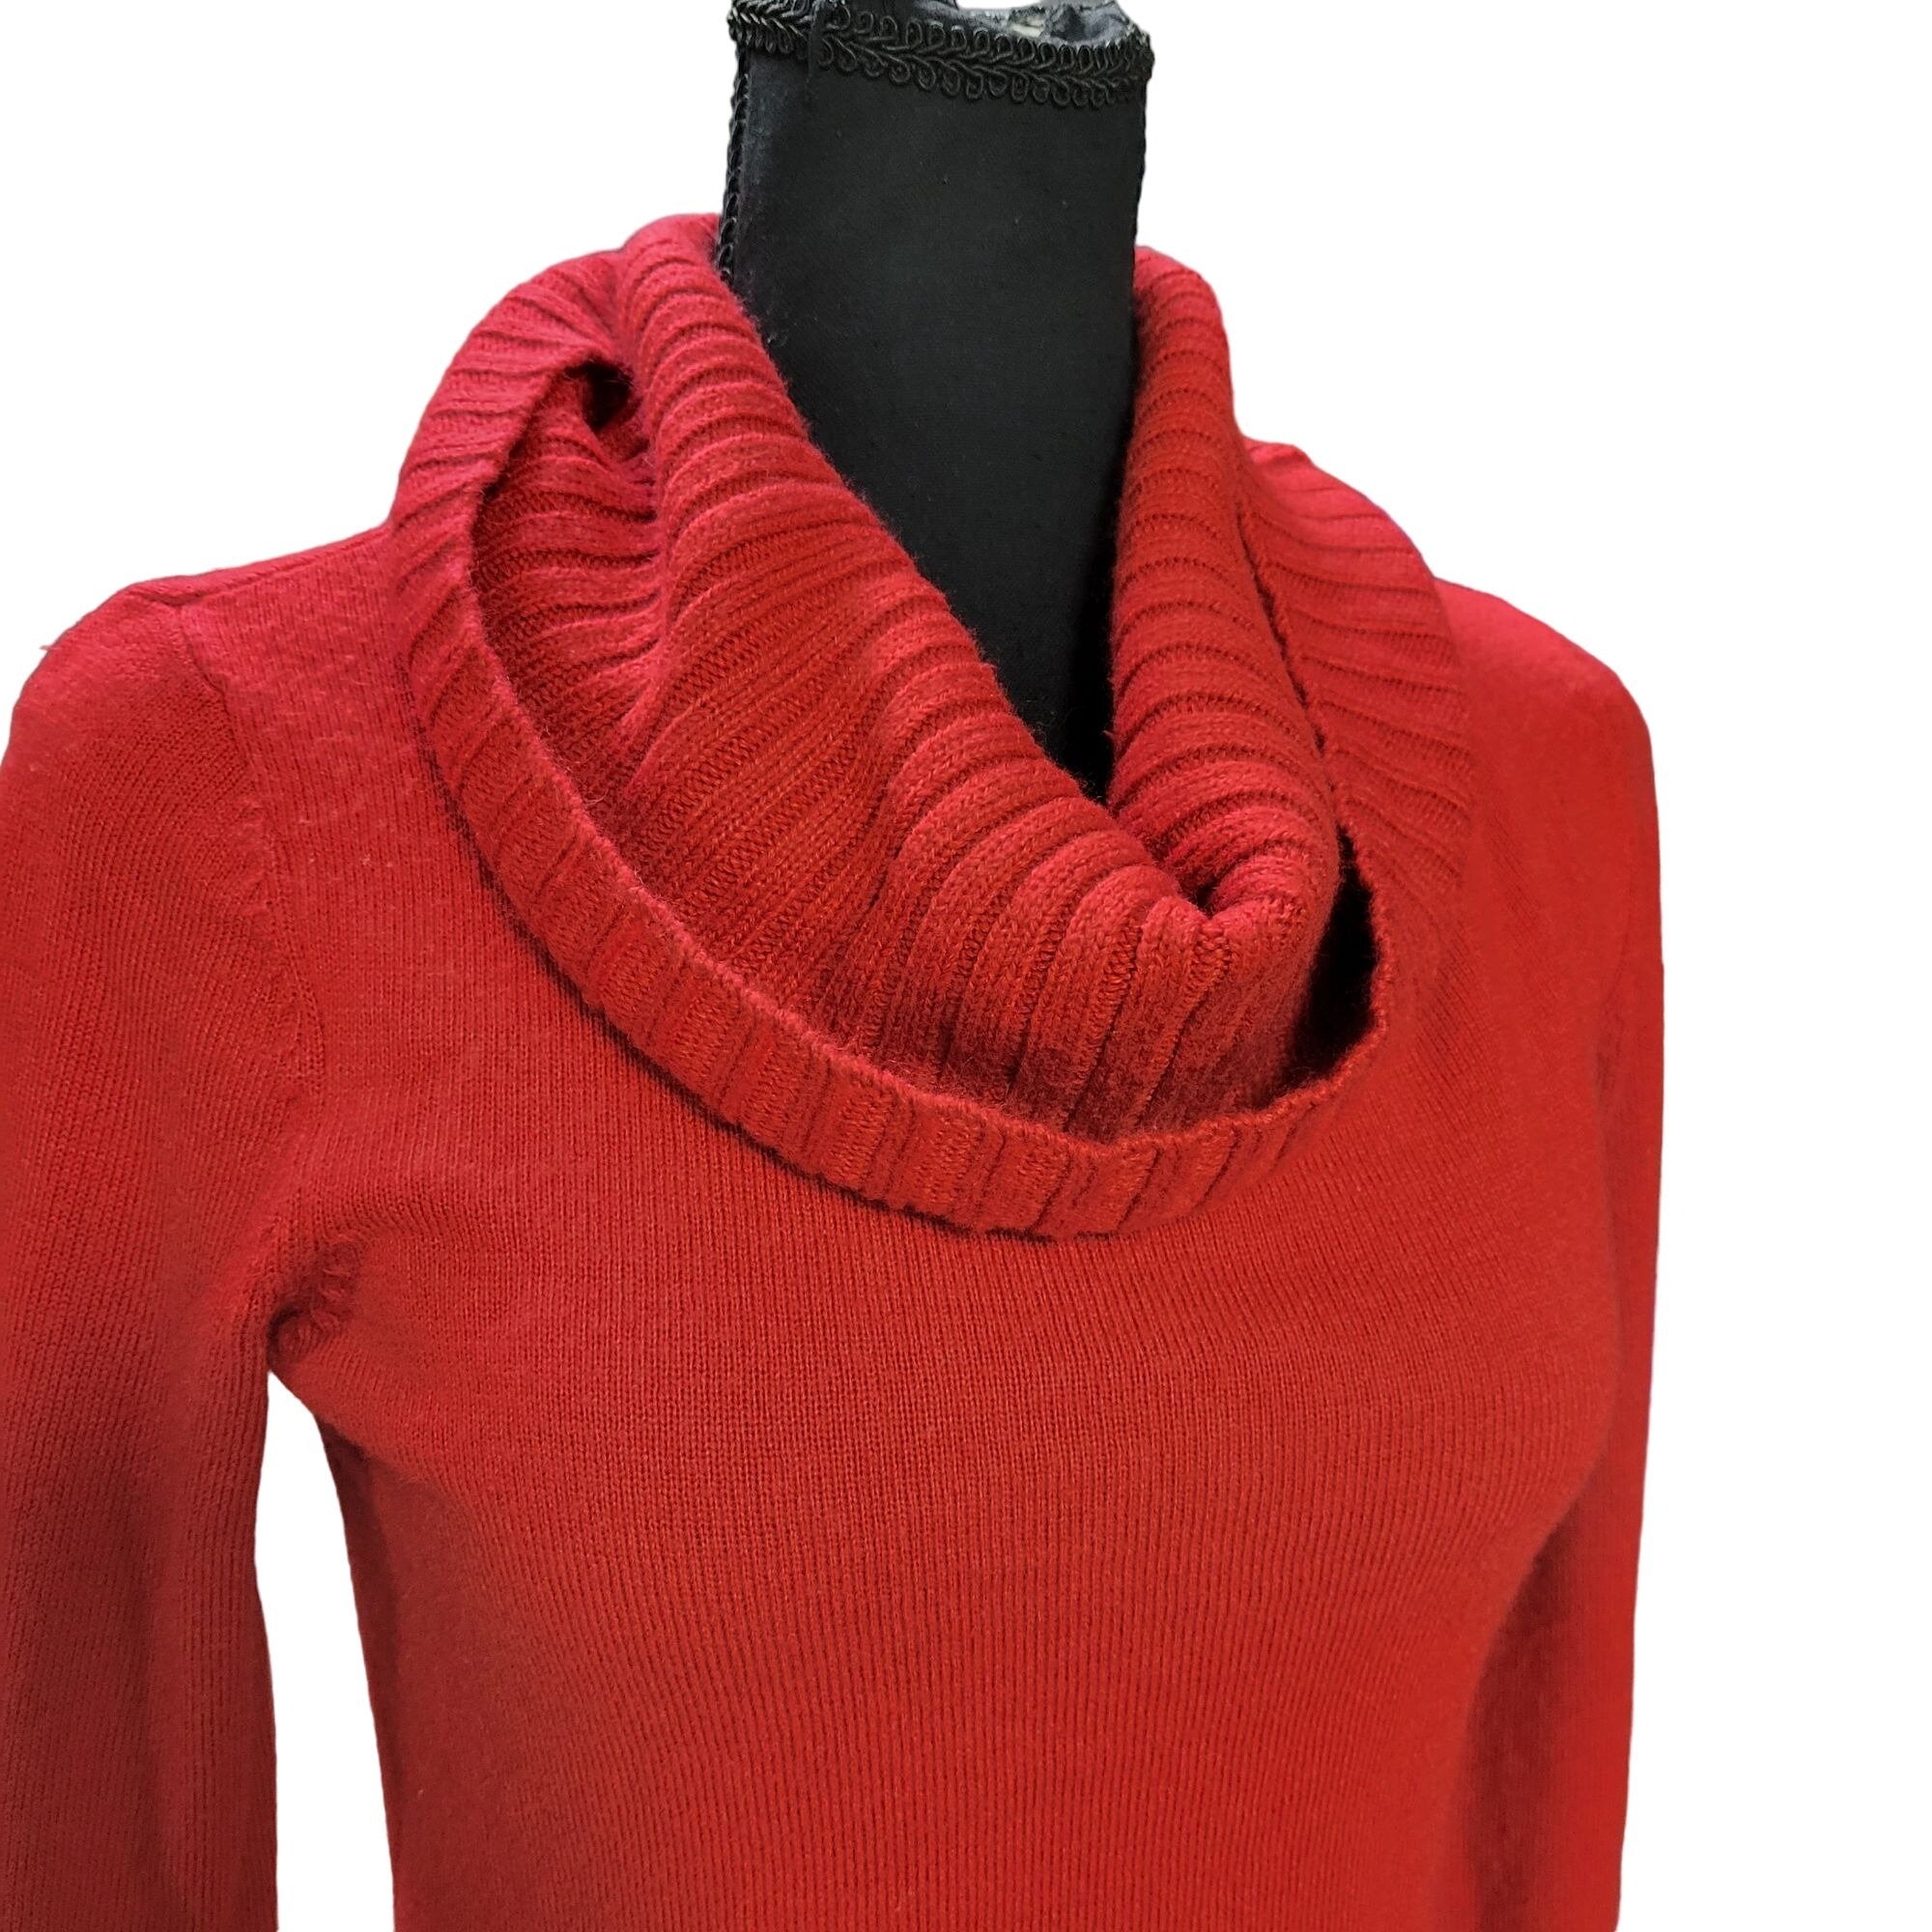 New York & Company Red Long Sleeve, Turtleneck Lightweight Sweater, Size XS